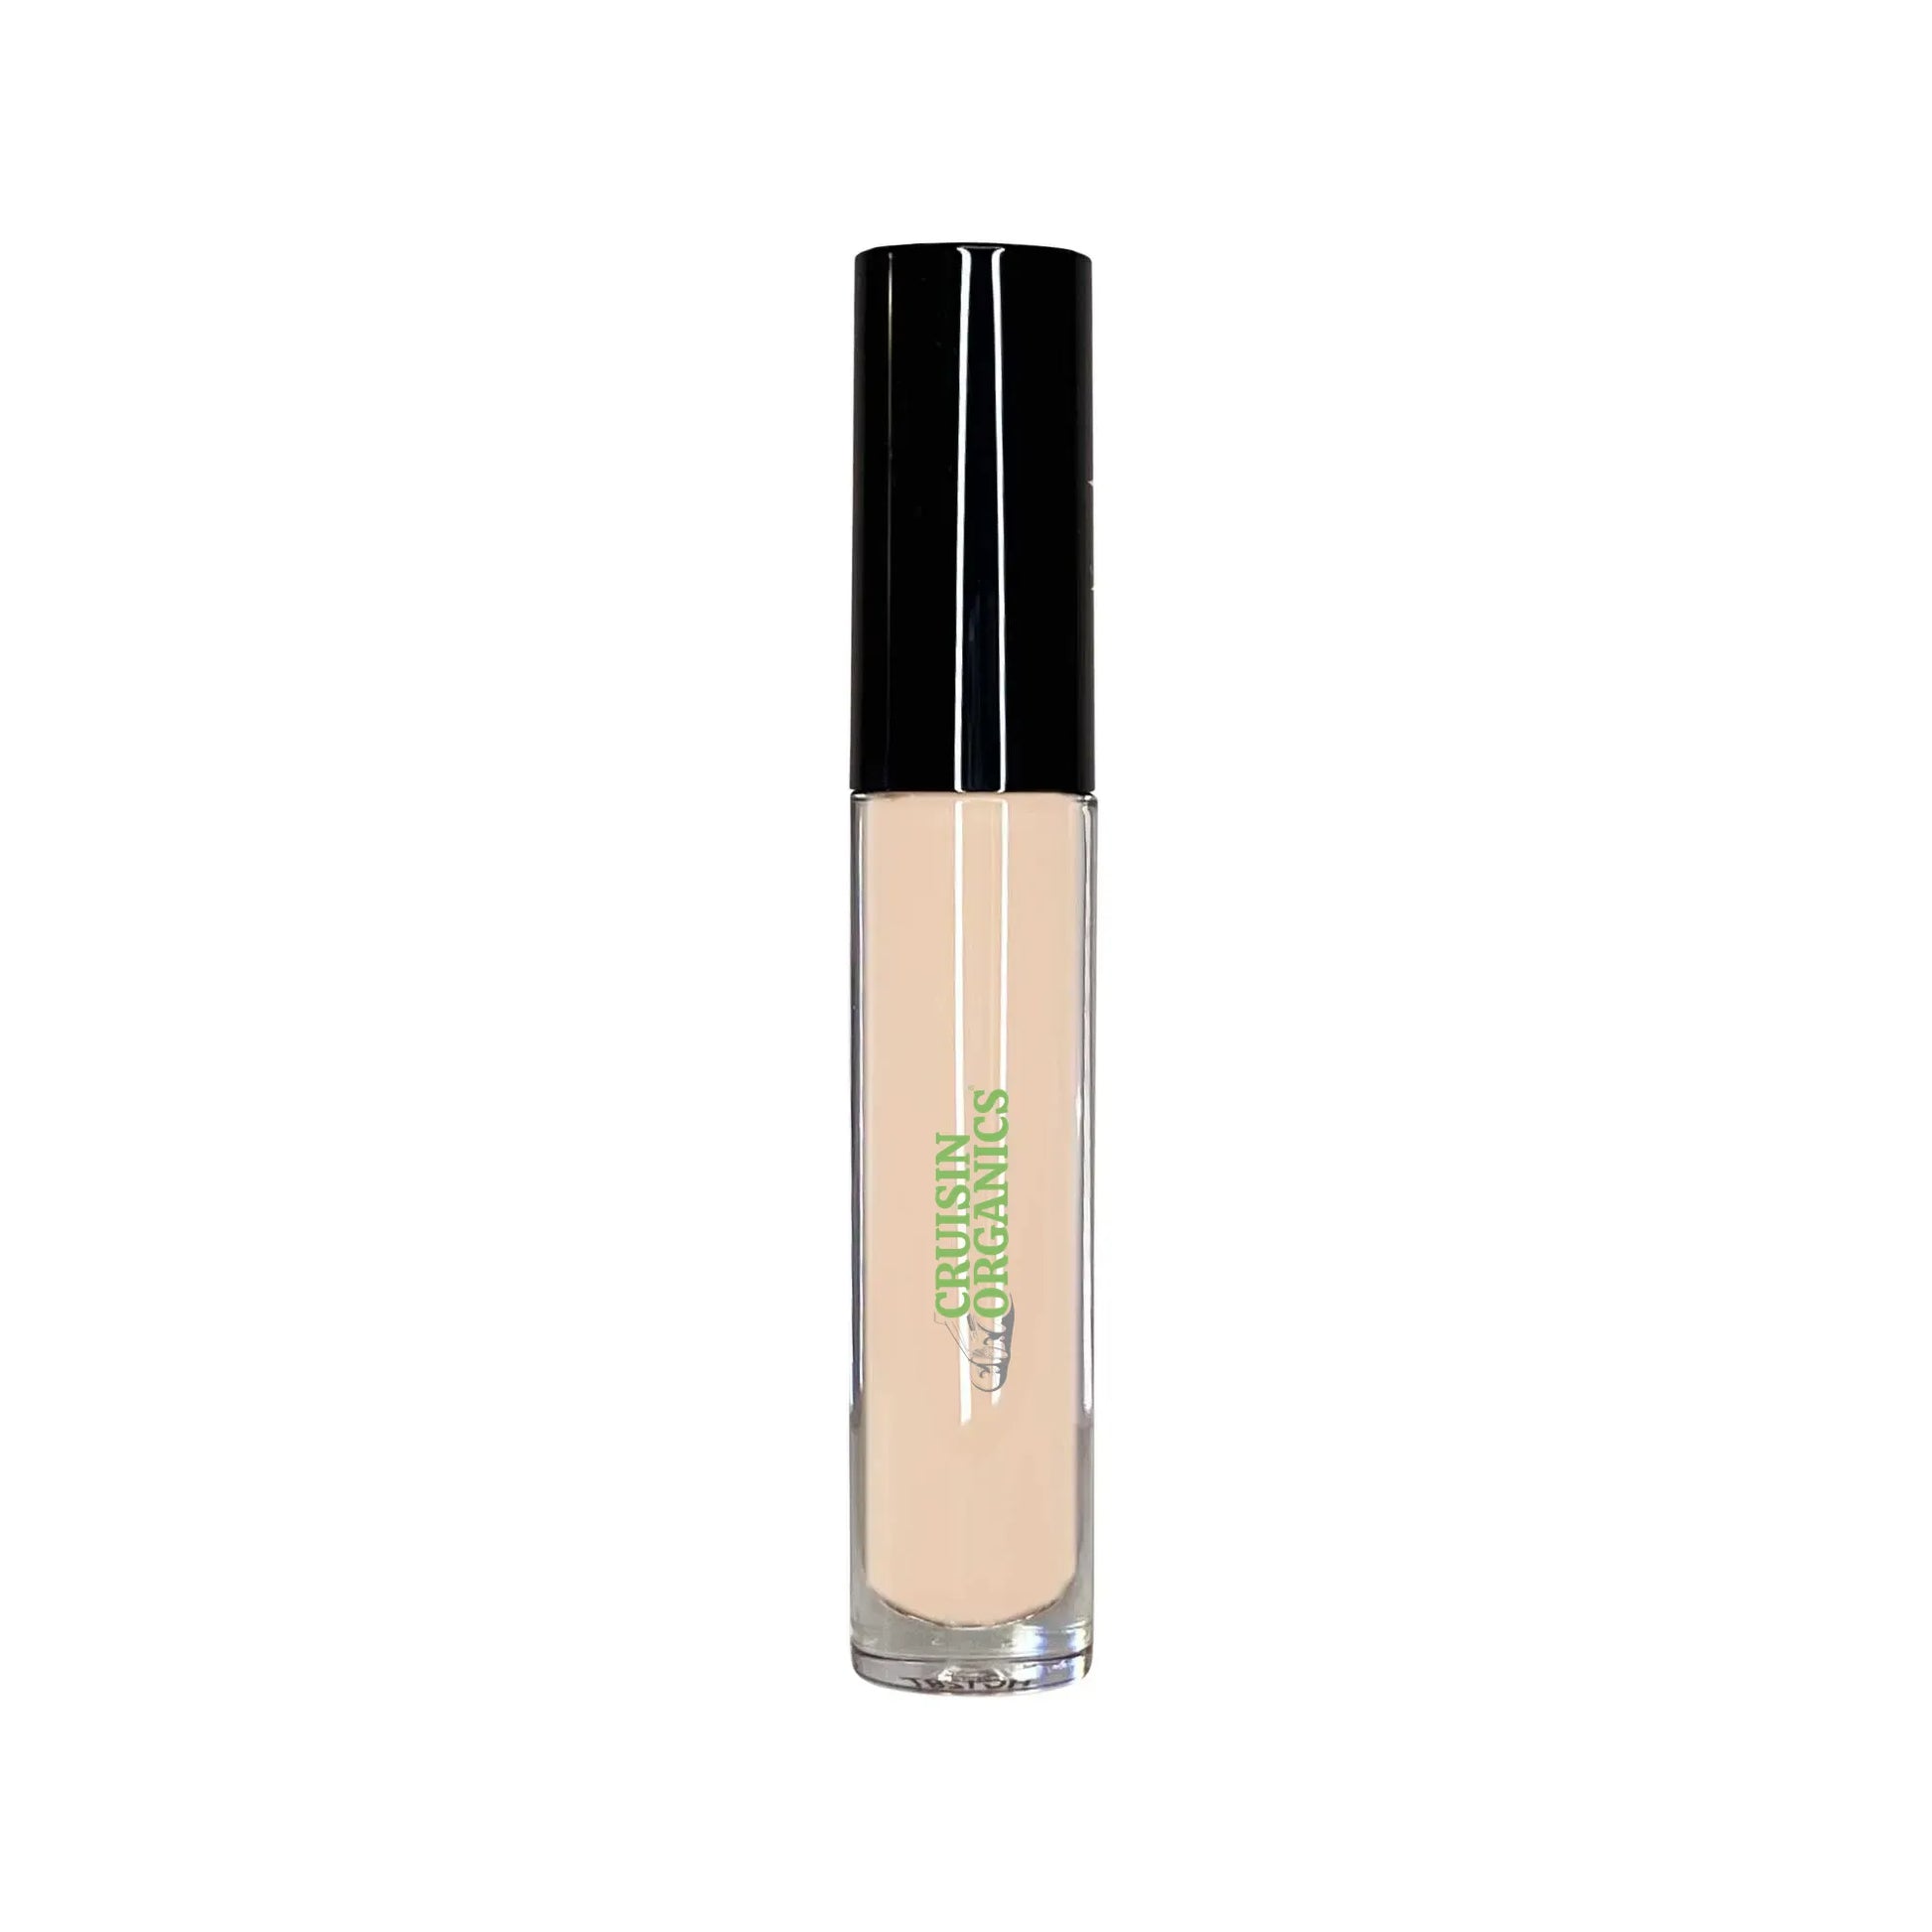 Achieve full coverage and brightening with Cruisin Organics' Com-ma Pause Concealing Cream. This versatile, vegan, and cruelty-free make-up doubles as a spot treatment and color corrector, perfect for flawless skin. Simply dab on tough dark spots with the included applicator to hide uneven skin tones.